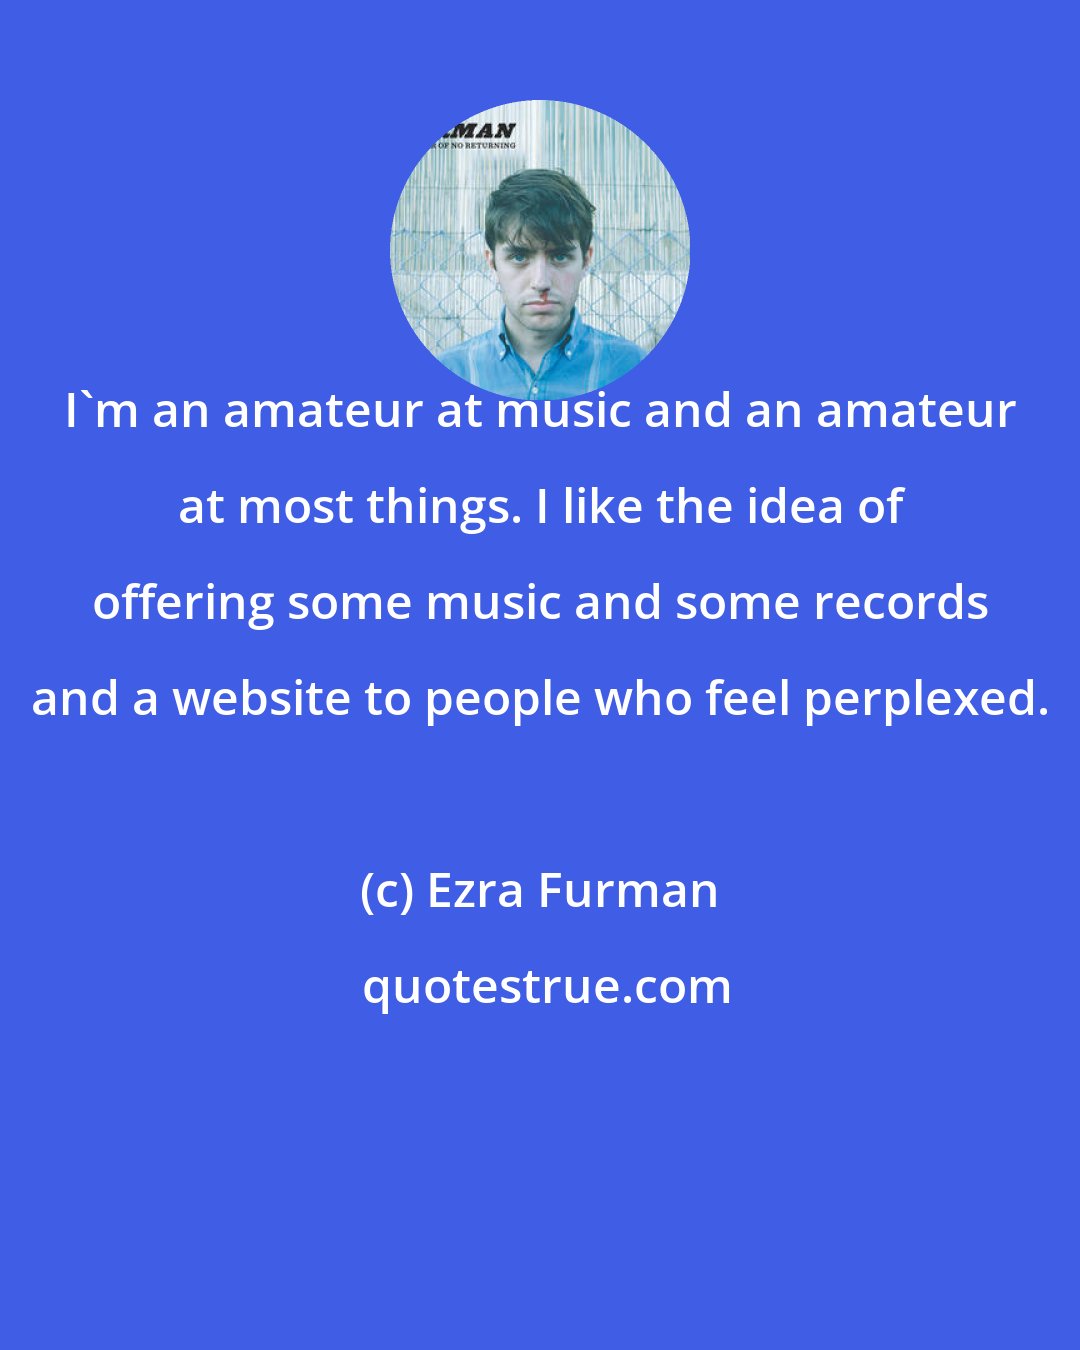 Ezra Furman: I'm an amateur at music and an amateur at most things. I like the idea of offering some music and some records and a website to people who feel perplexed.